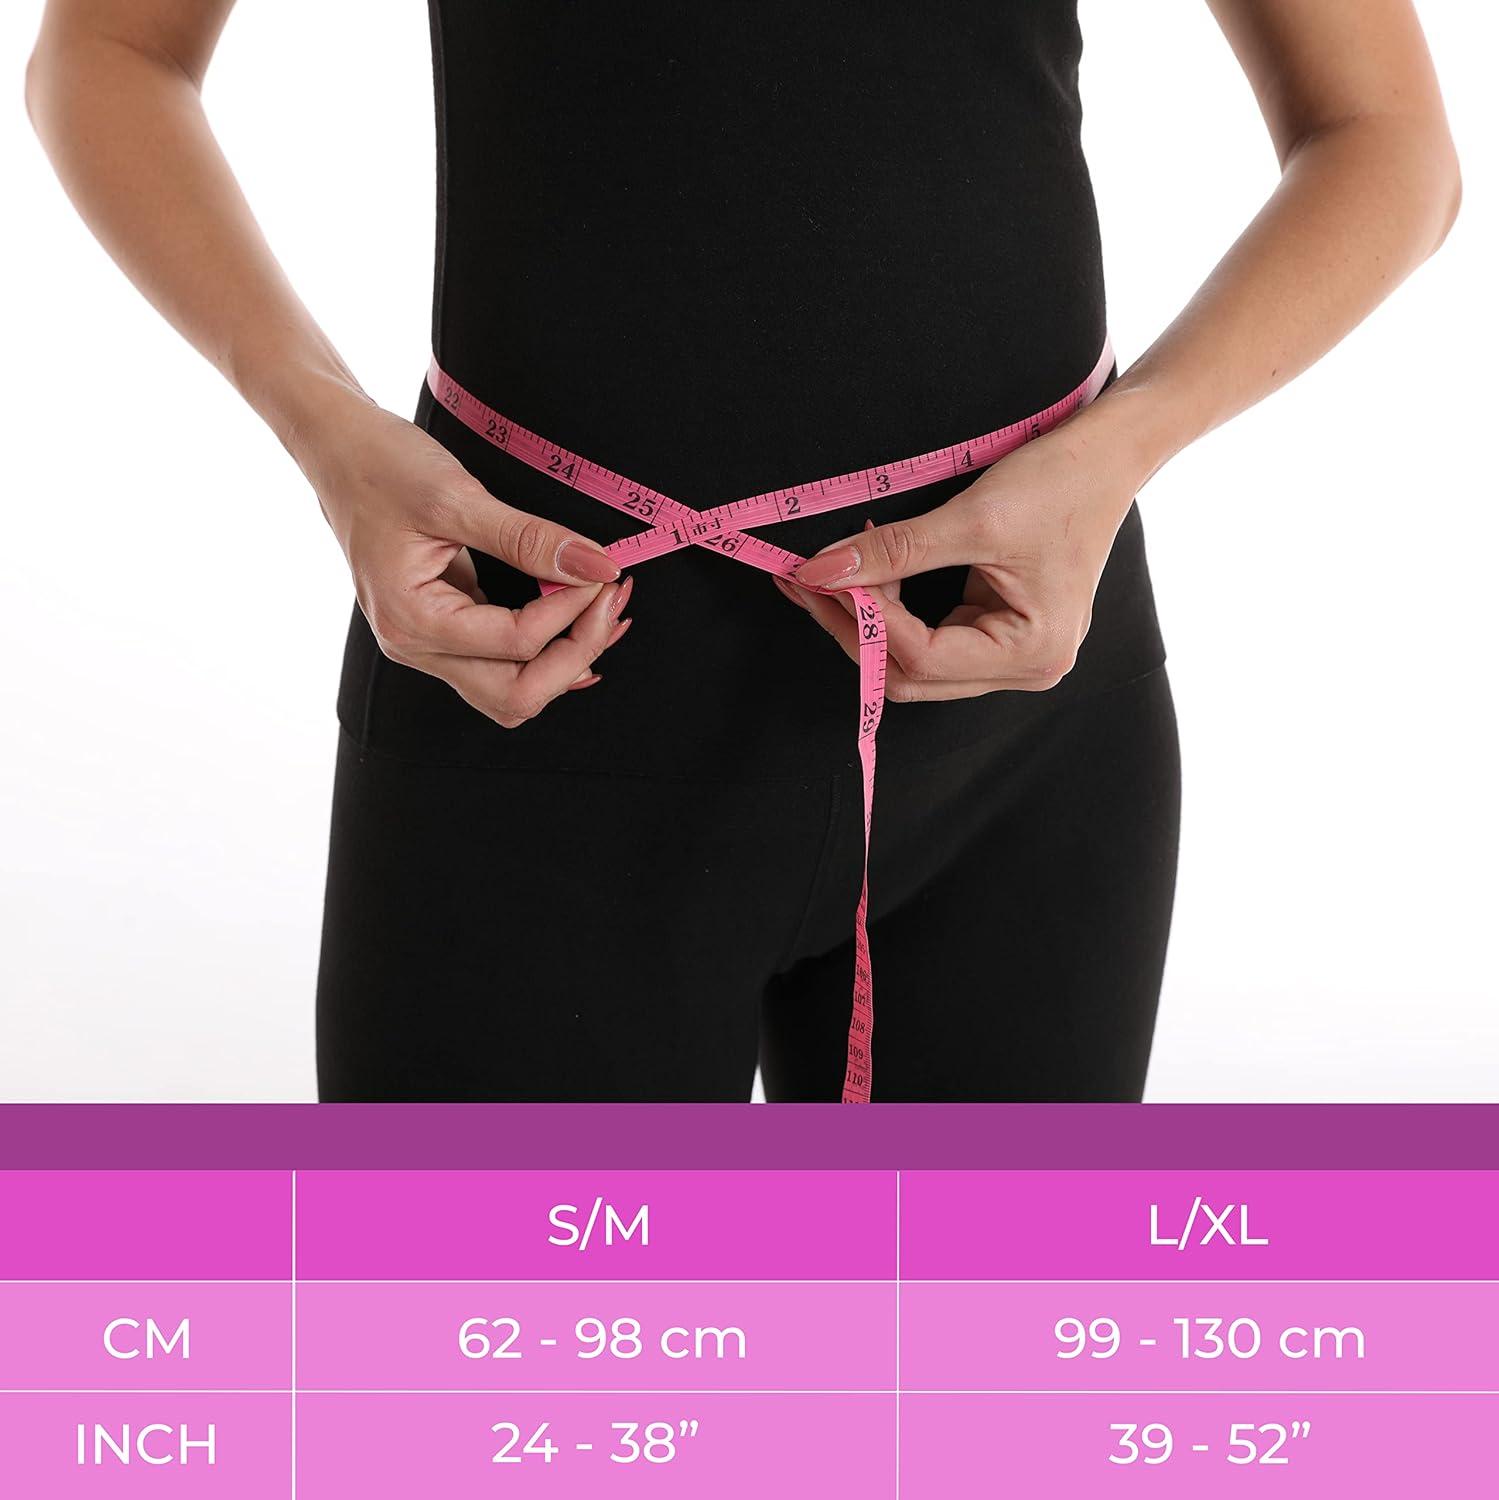 Umbilical Hernia Support Belt for Women. Adjustable Abdominal Hernia Band.  Orthopedic Navel Brace. Comfortable Postpartum Girdle. Ideal for Hernia  Relief (L/XL) L/XL (39 to 52 inch umbilical area)